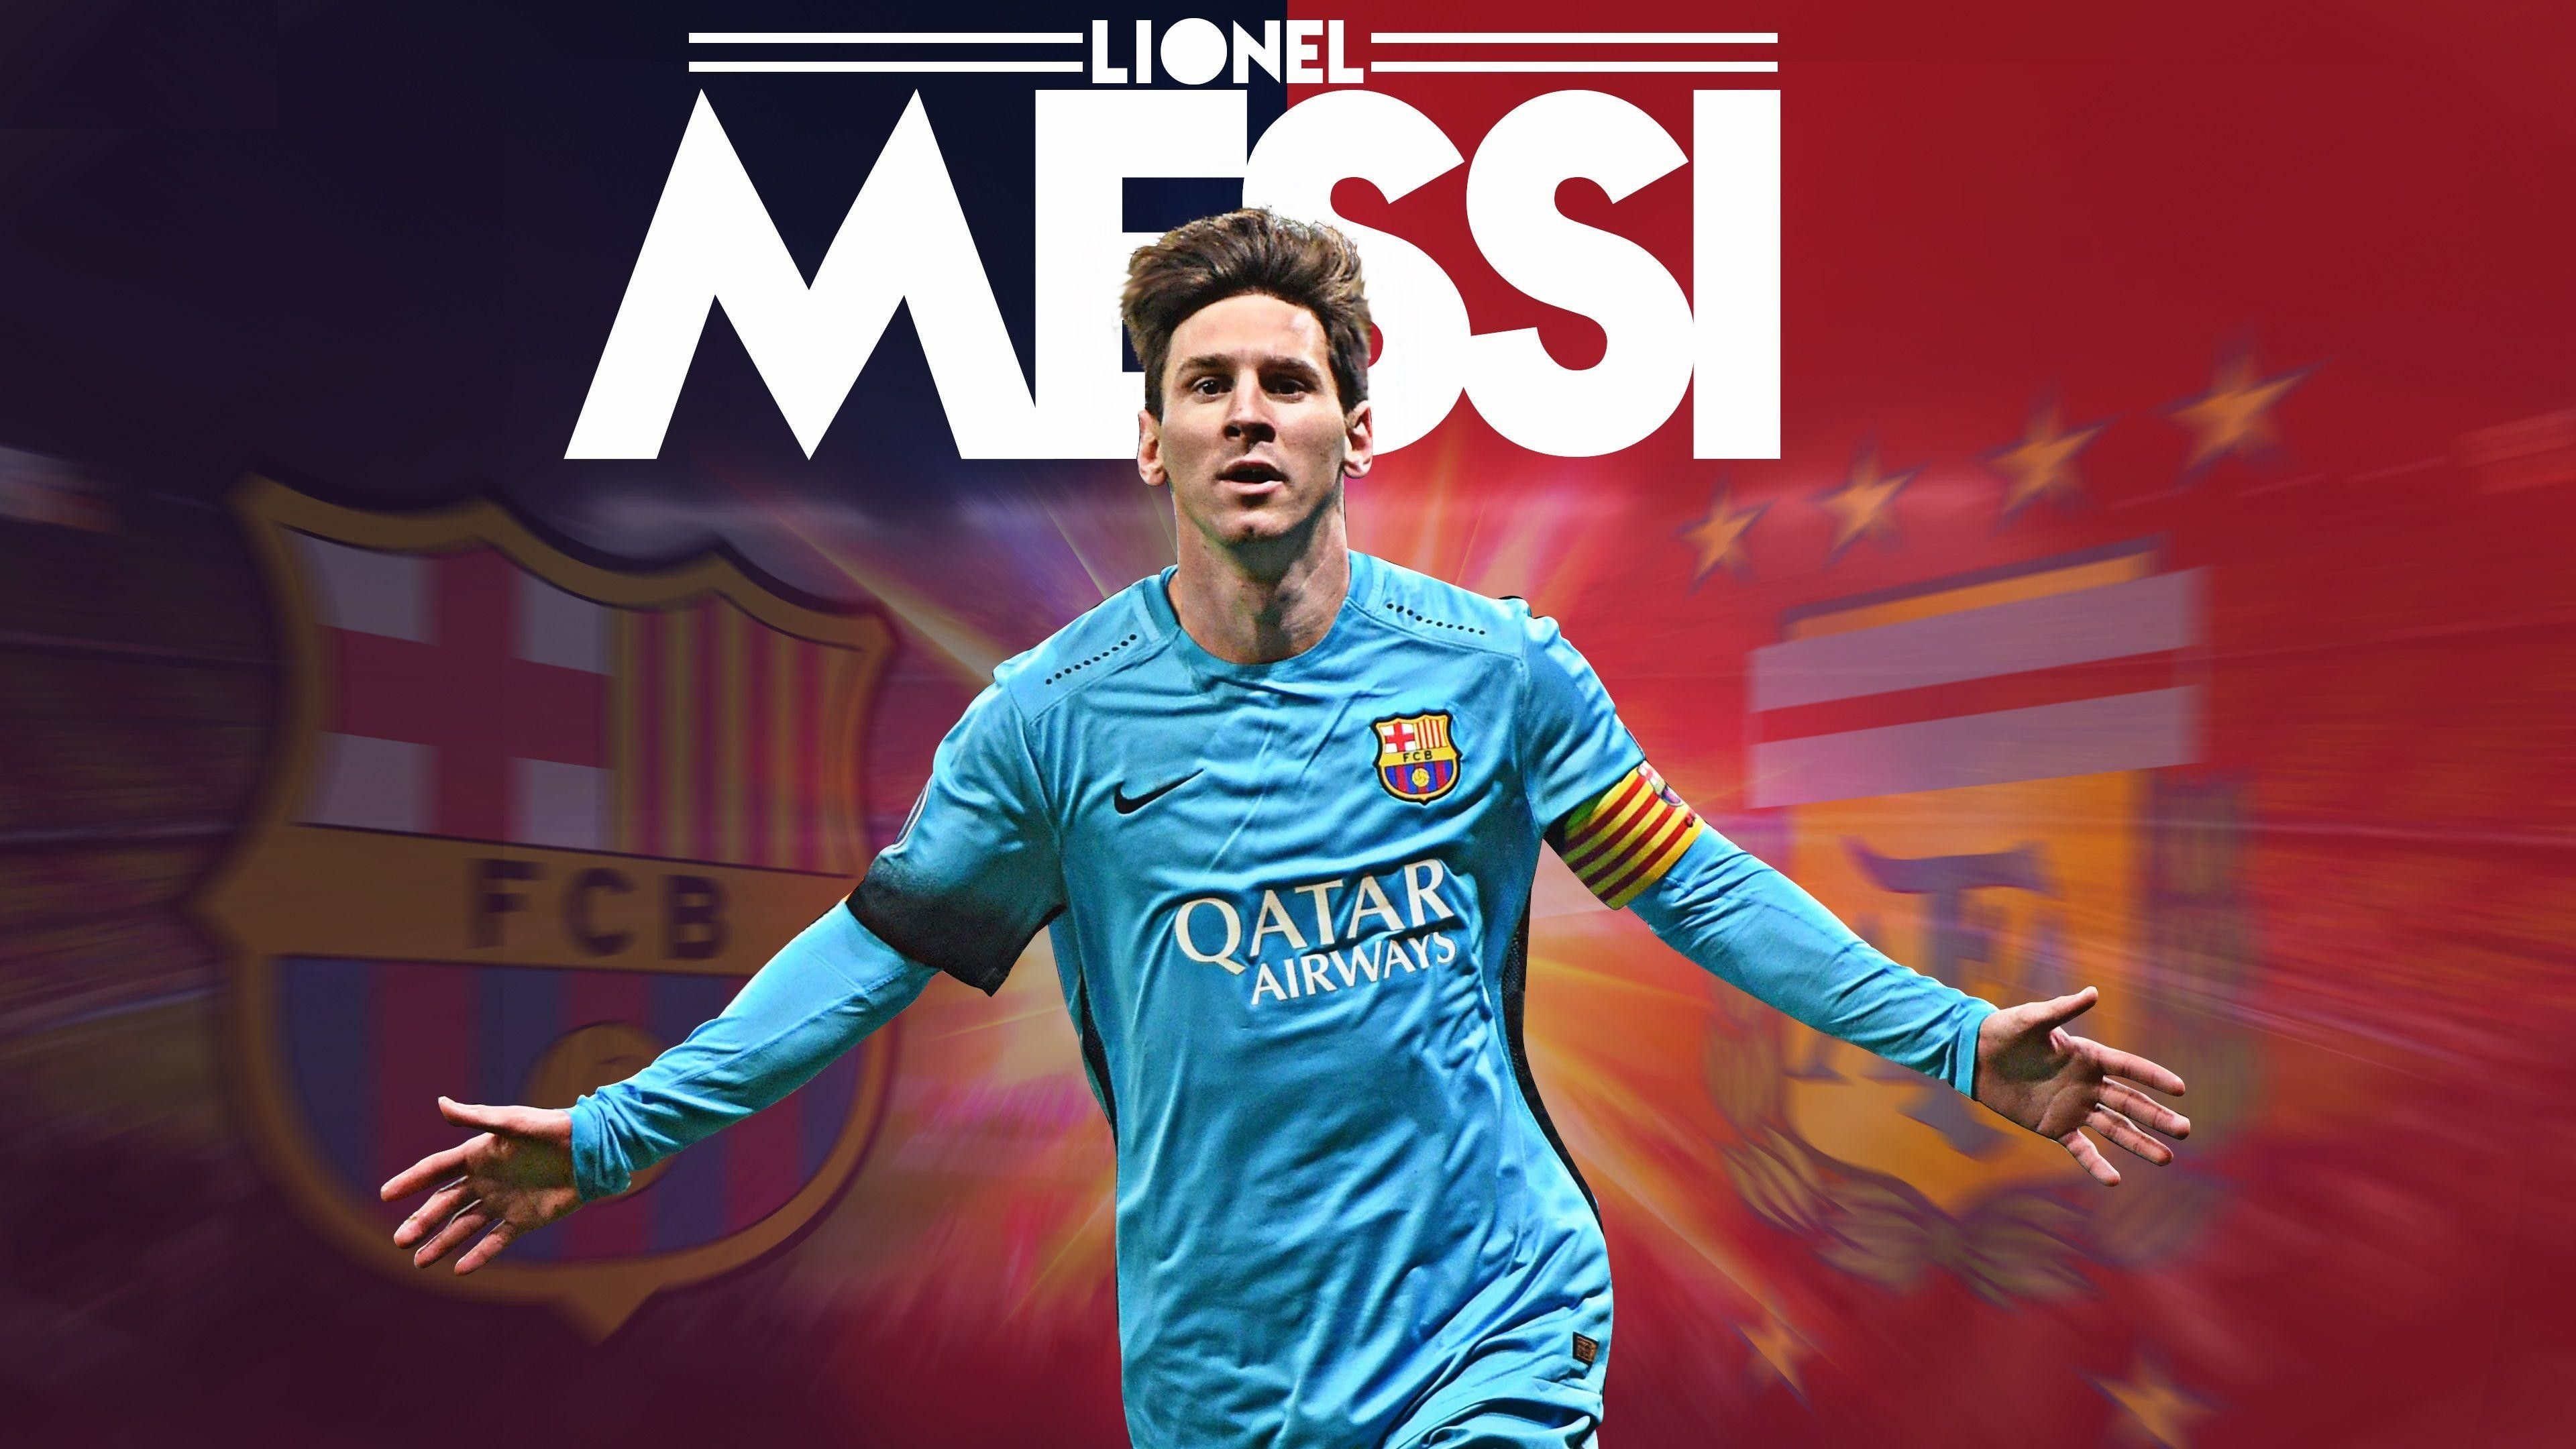 lionel messi best wallpapers,football player,soccer player,player,font,jersey